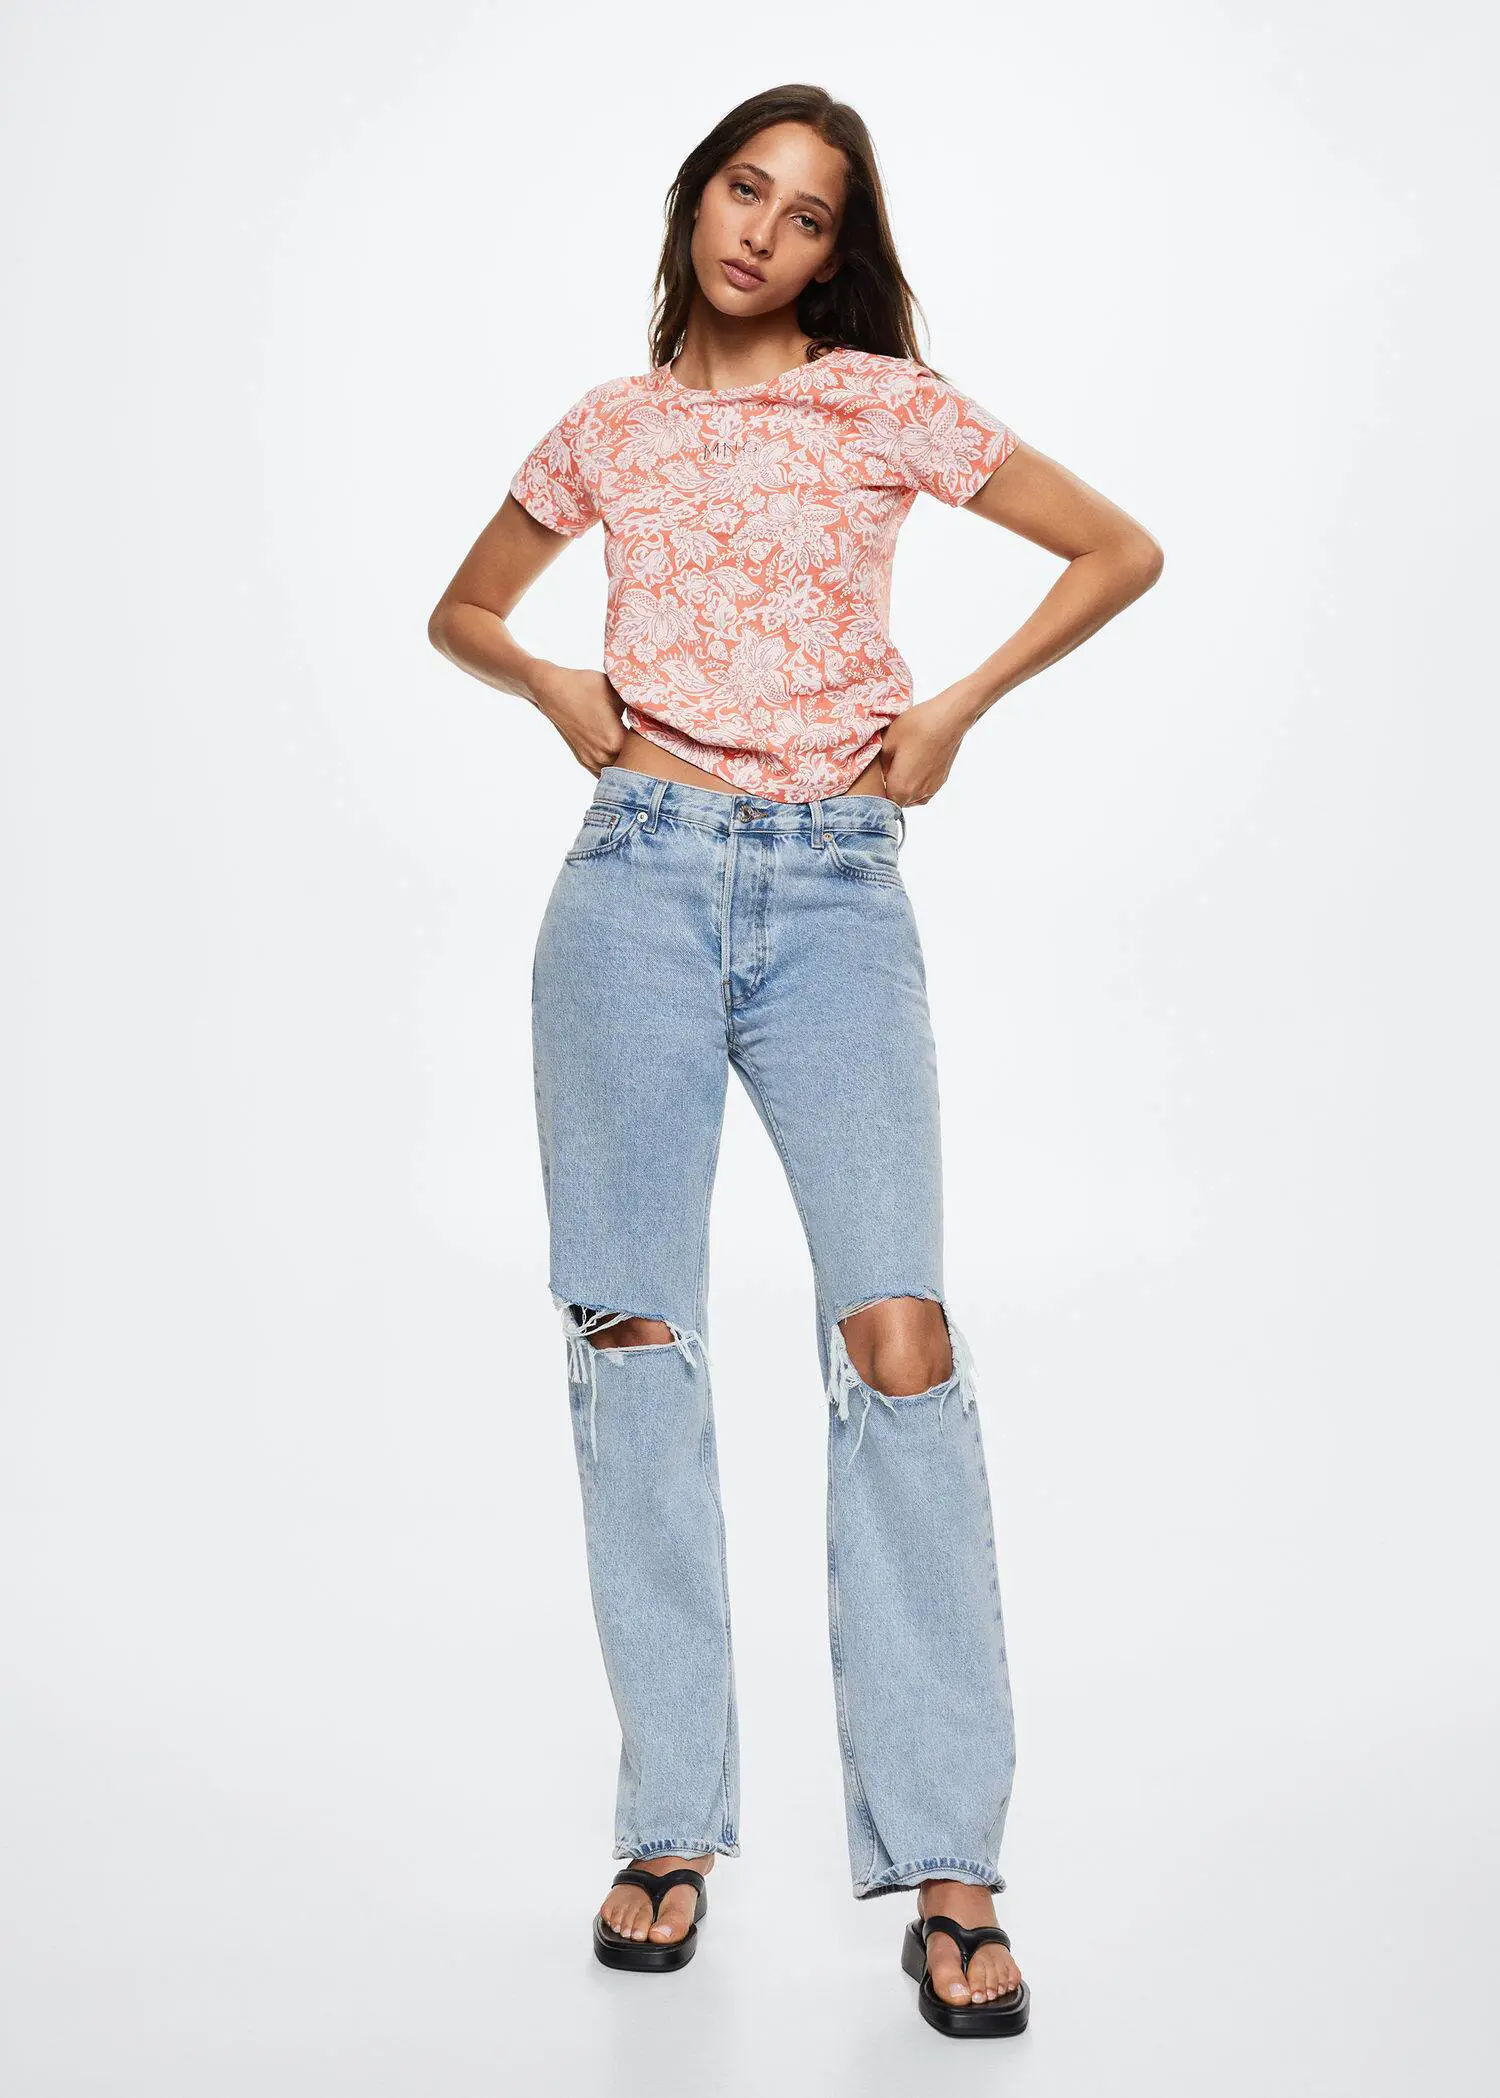 Mango Printed cotton-blend T-shirt. a woman in a pink floral shirt and blue jeans. 